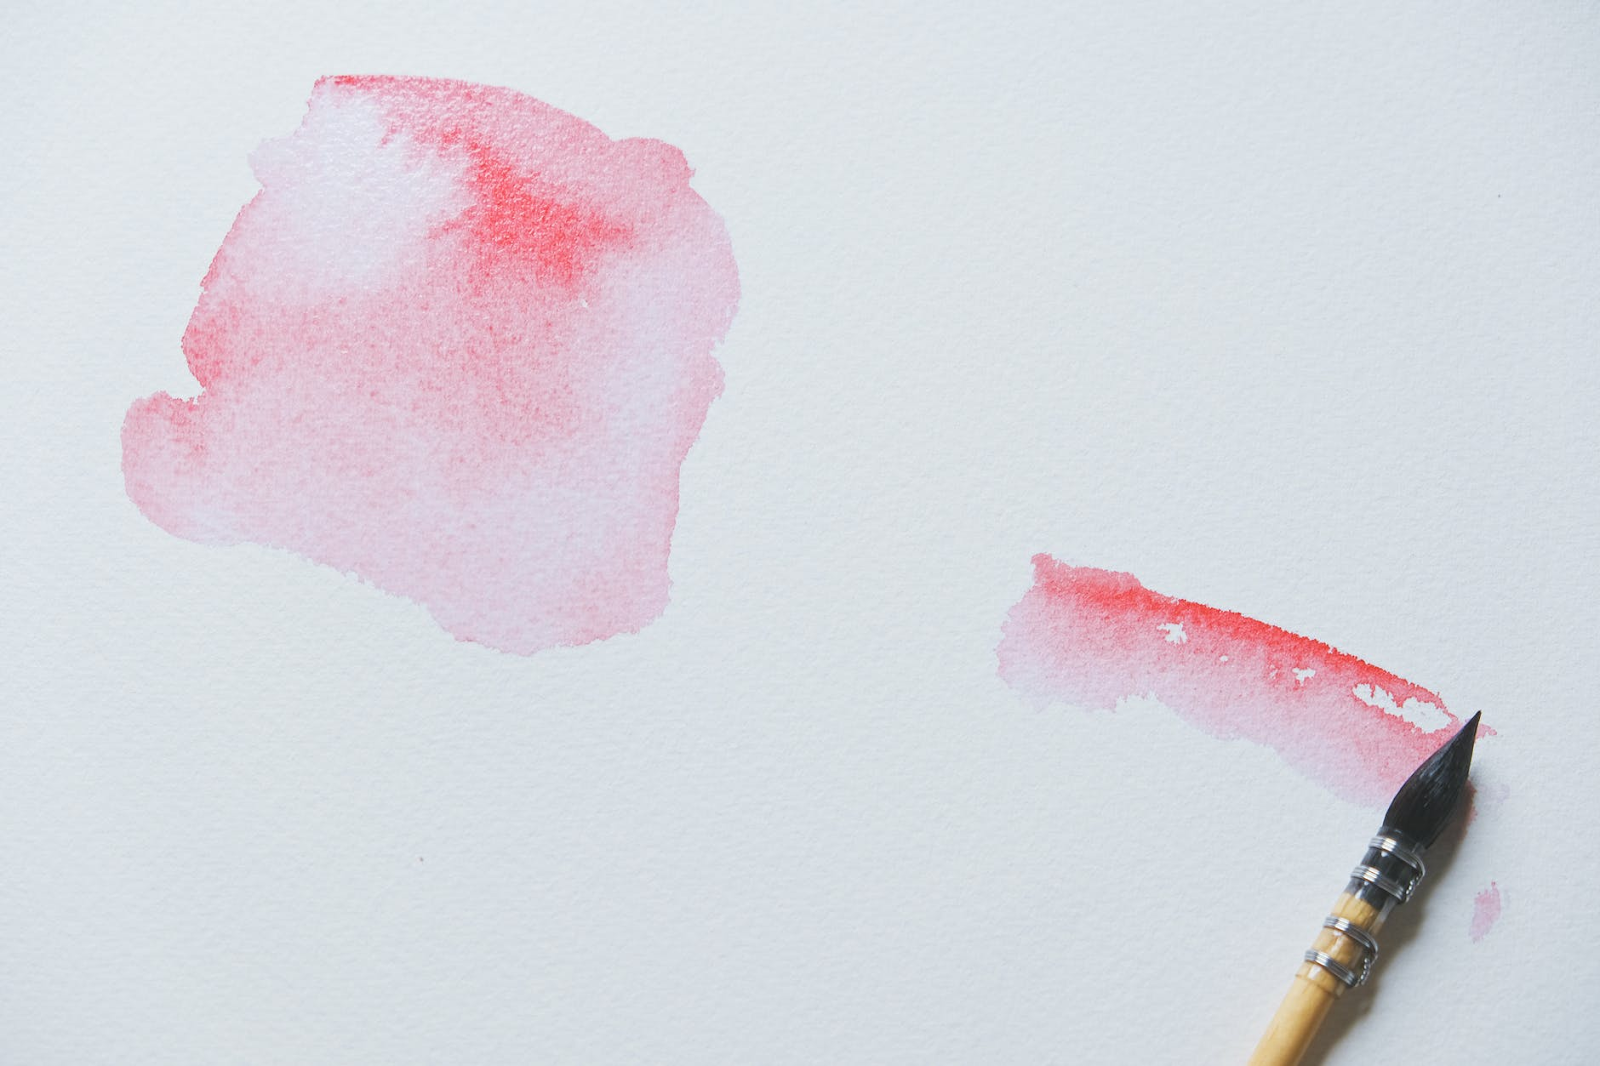 Watercolor painting tips for paint enthusiasts